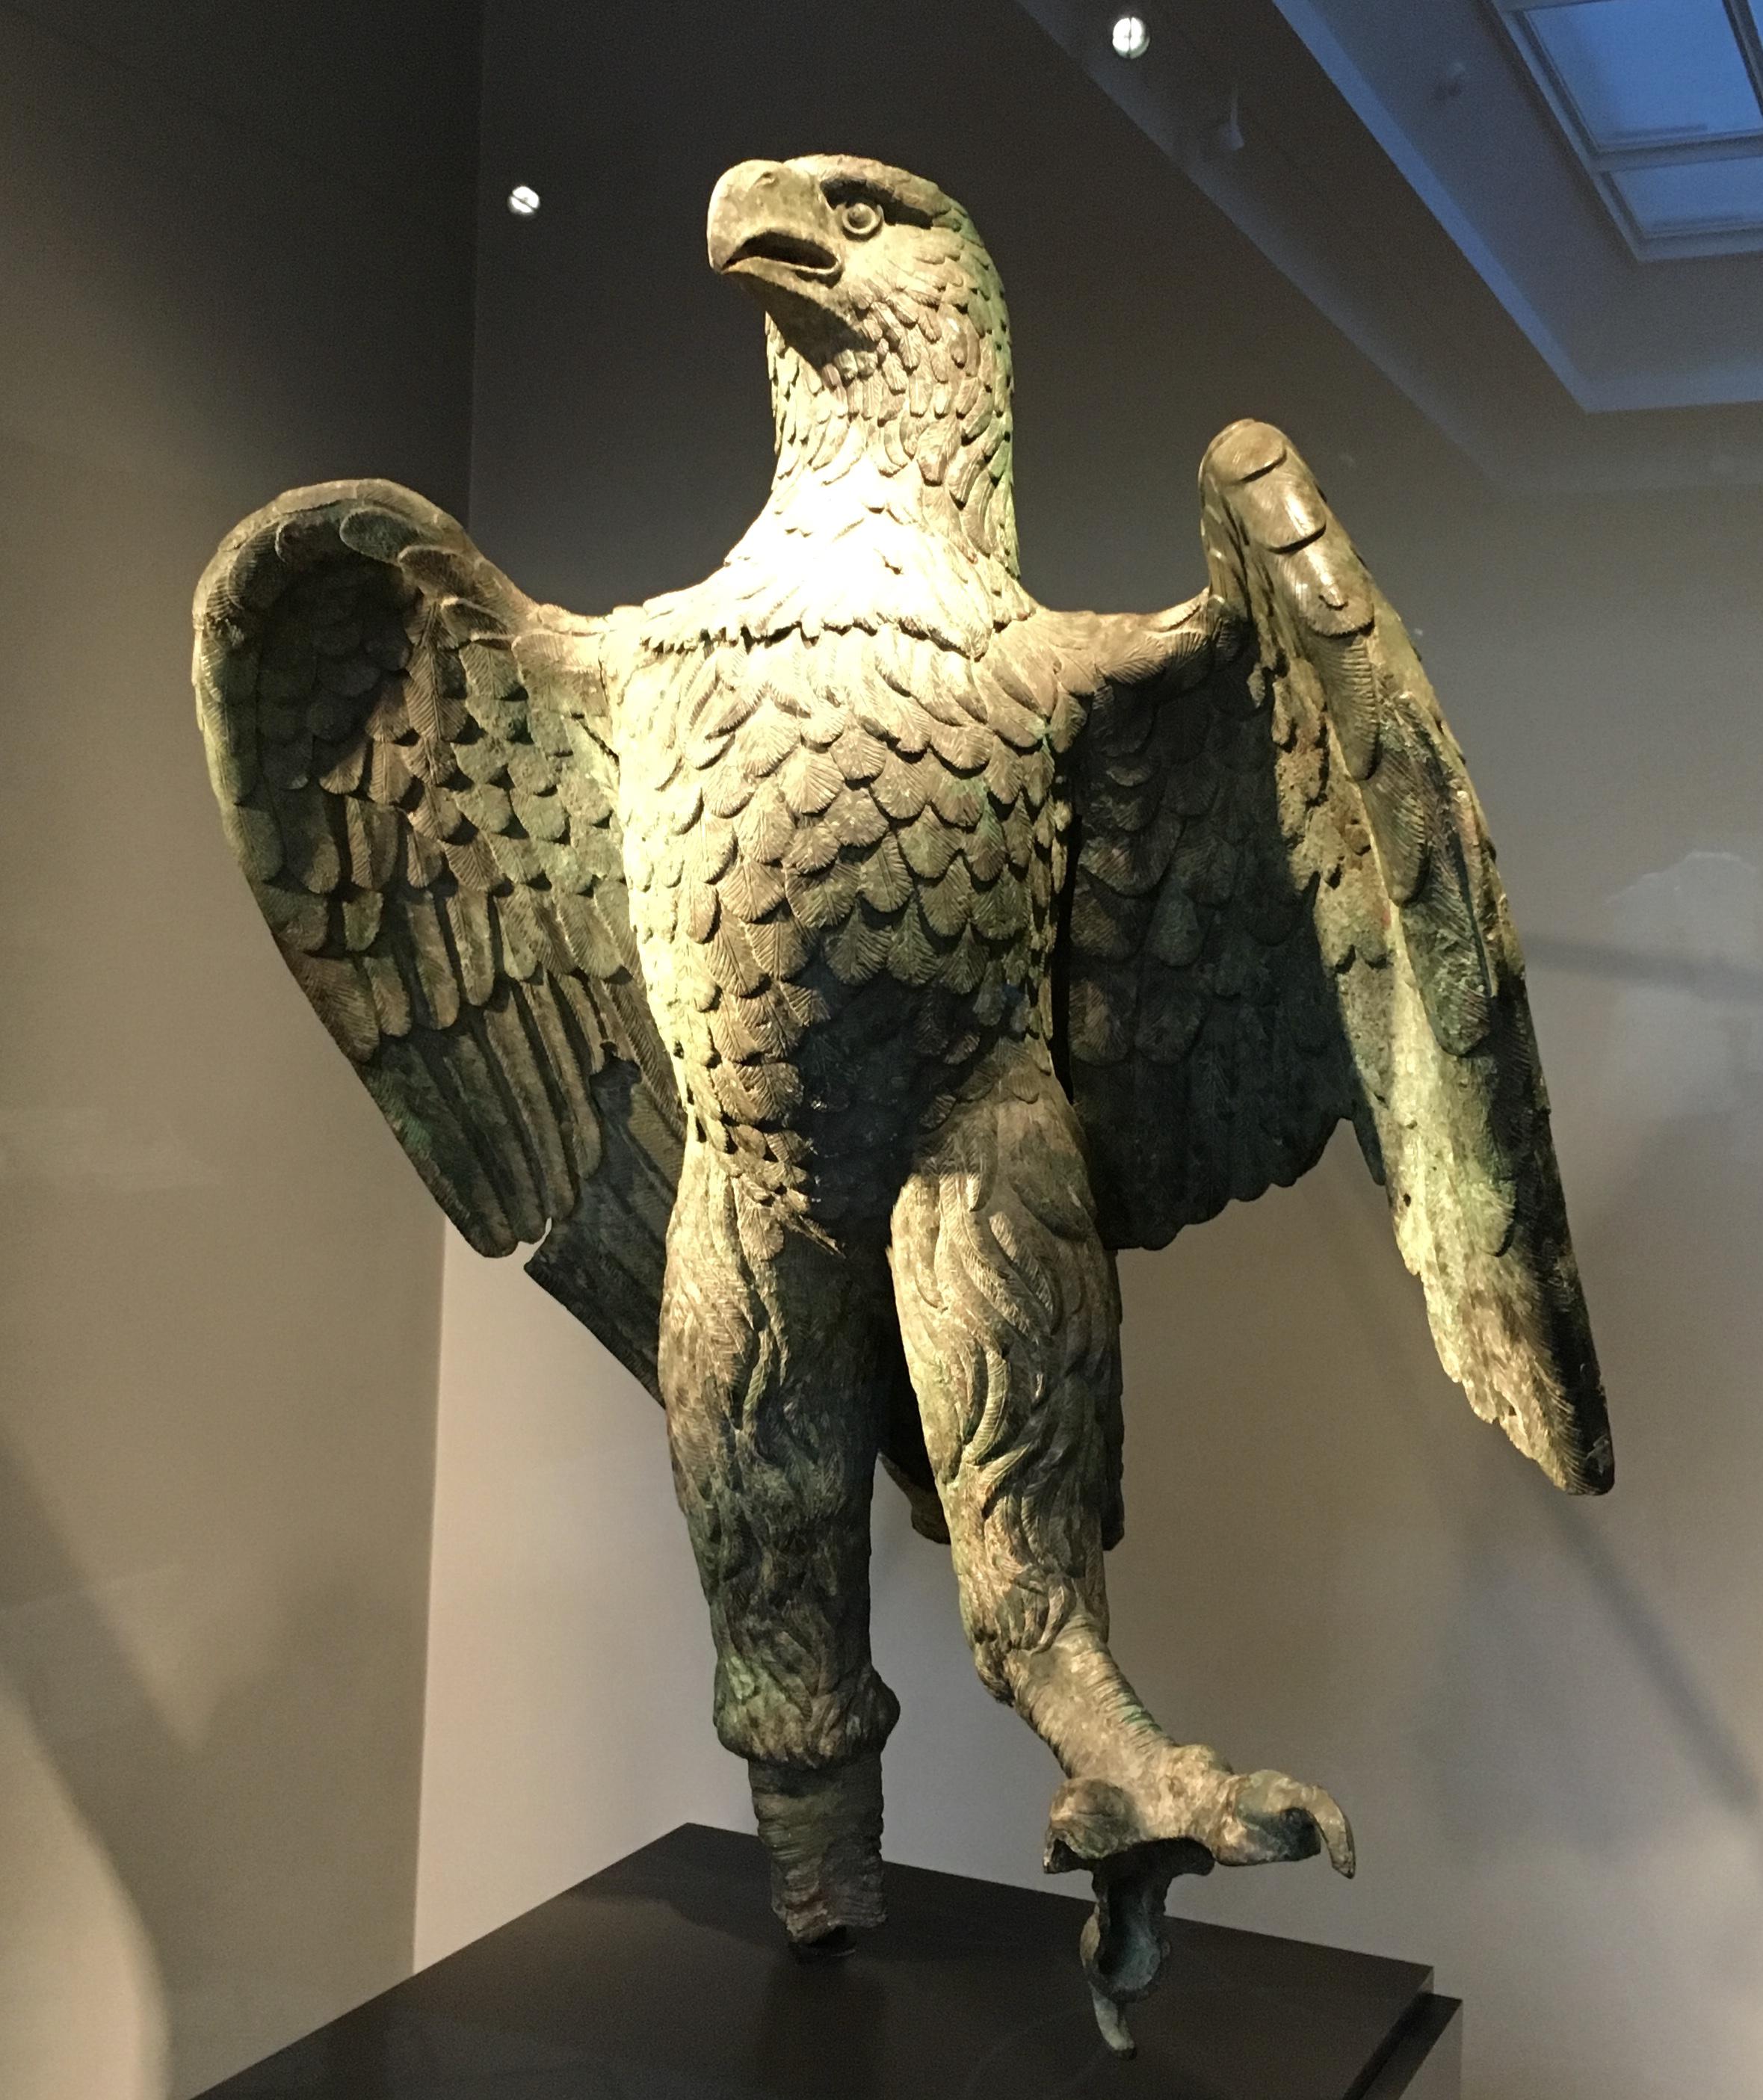 Bronze Roman eagle, crafted 100-200 CE, which complemented a sculptural ensemble representative of either Jupiter or an emperor. It probably grasped a globe or thunderbolt in its raised talon. Getty Villa. Pacific Palisades, CA. 